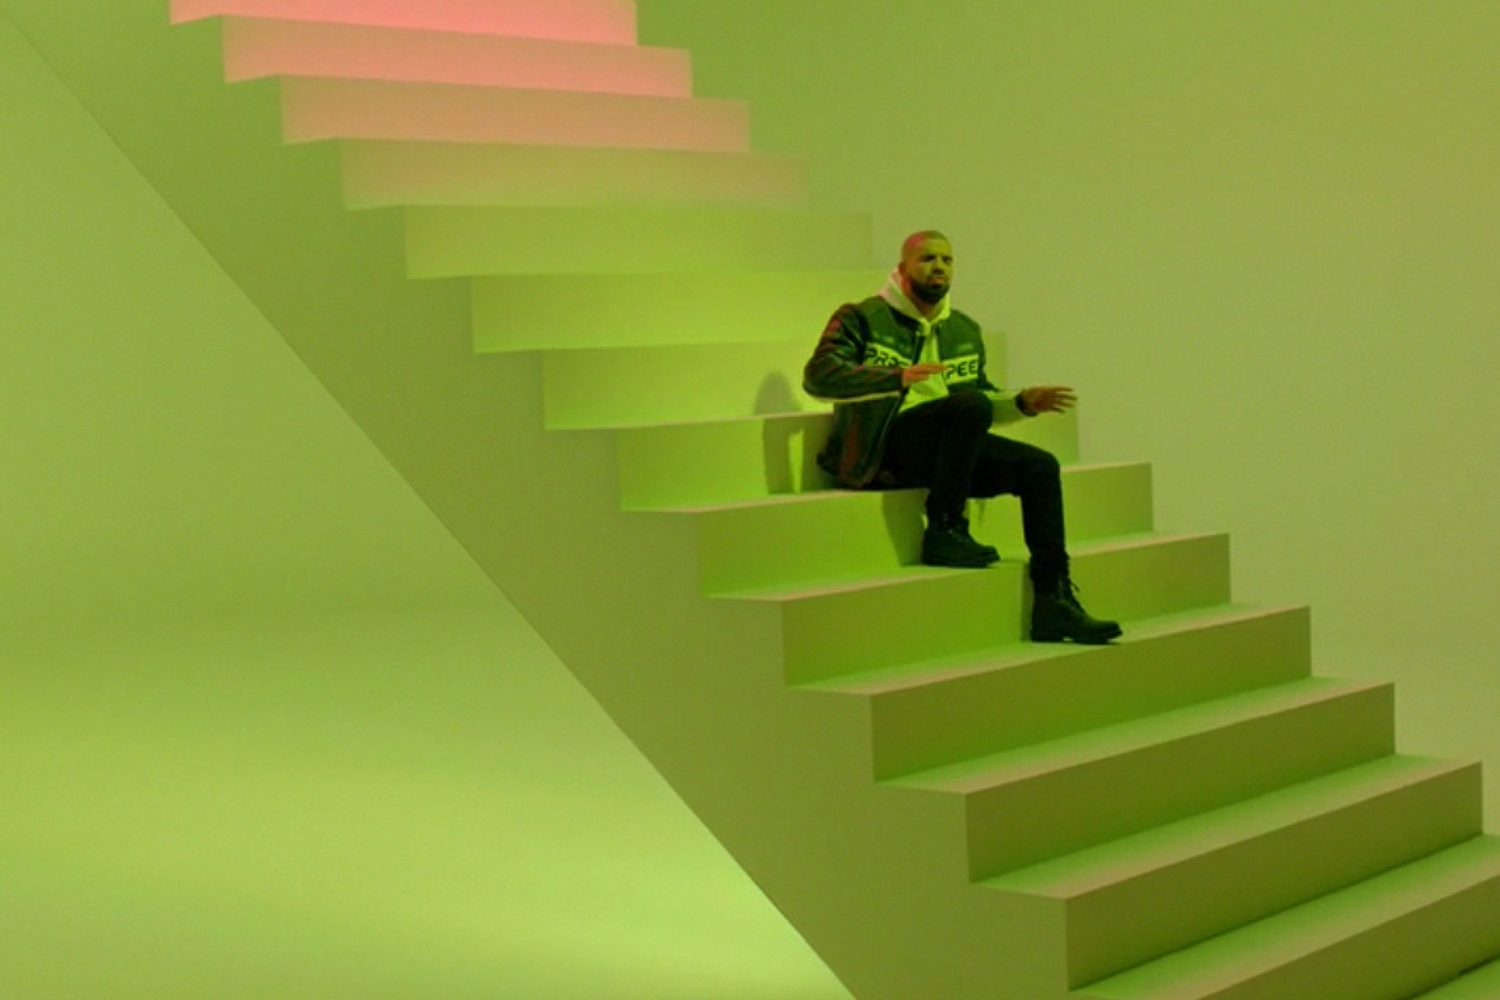 Drake’s ‘Hotline Bling’ now has a video